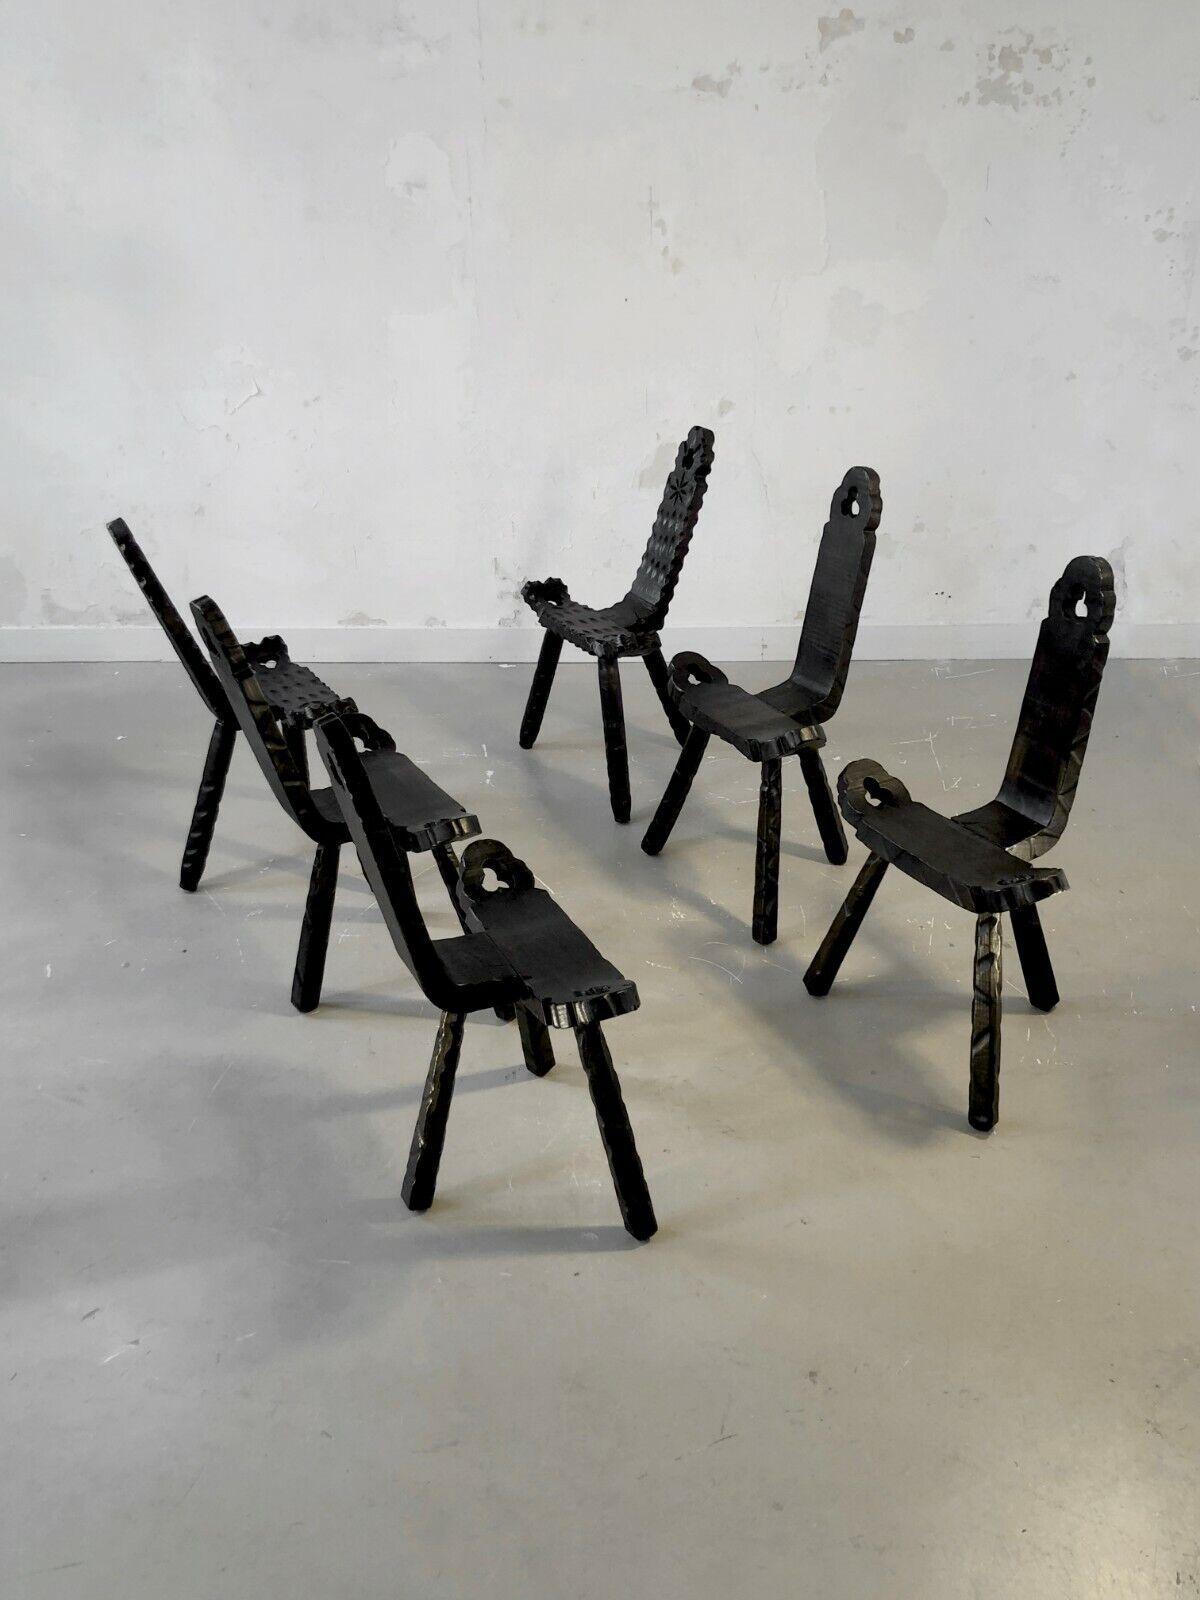 A set of 6 surprising tripod chairs, Modernist, Brutalist, Folk Art, Tribal Art, sculpted in massive wood, with beautiful floral organic motifs, to be attributed, France 1950.

This set is a beautiful demonstration of the resources and formal